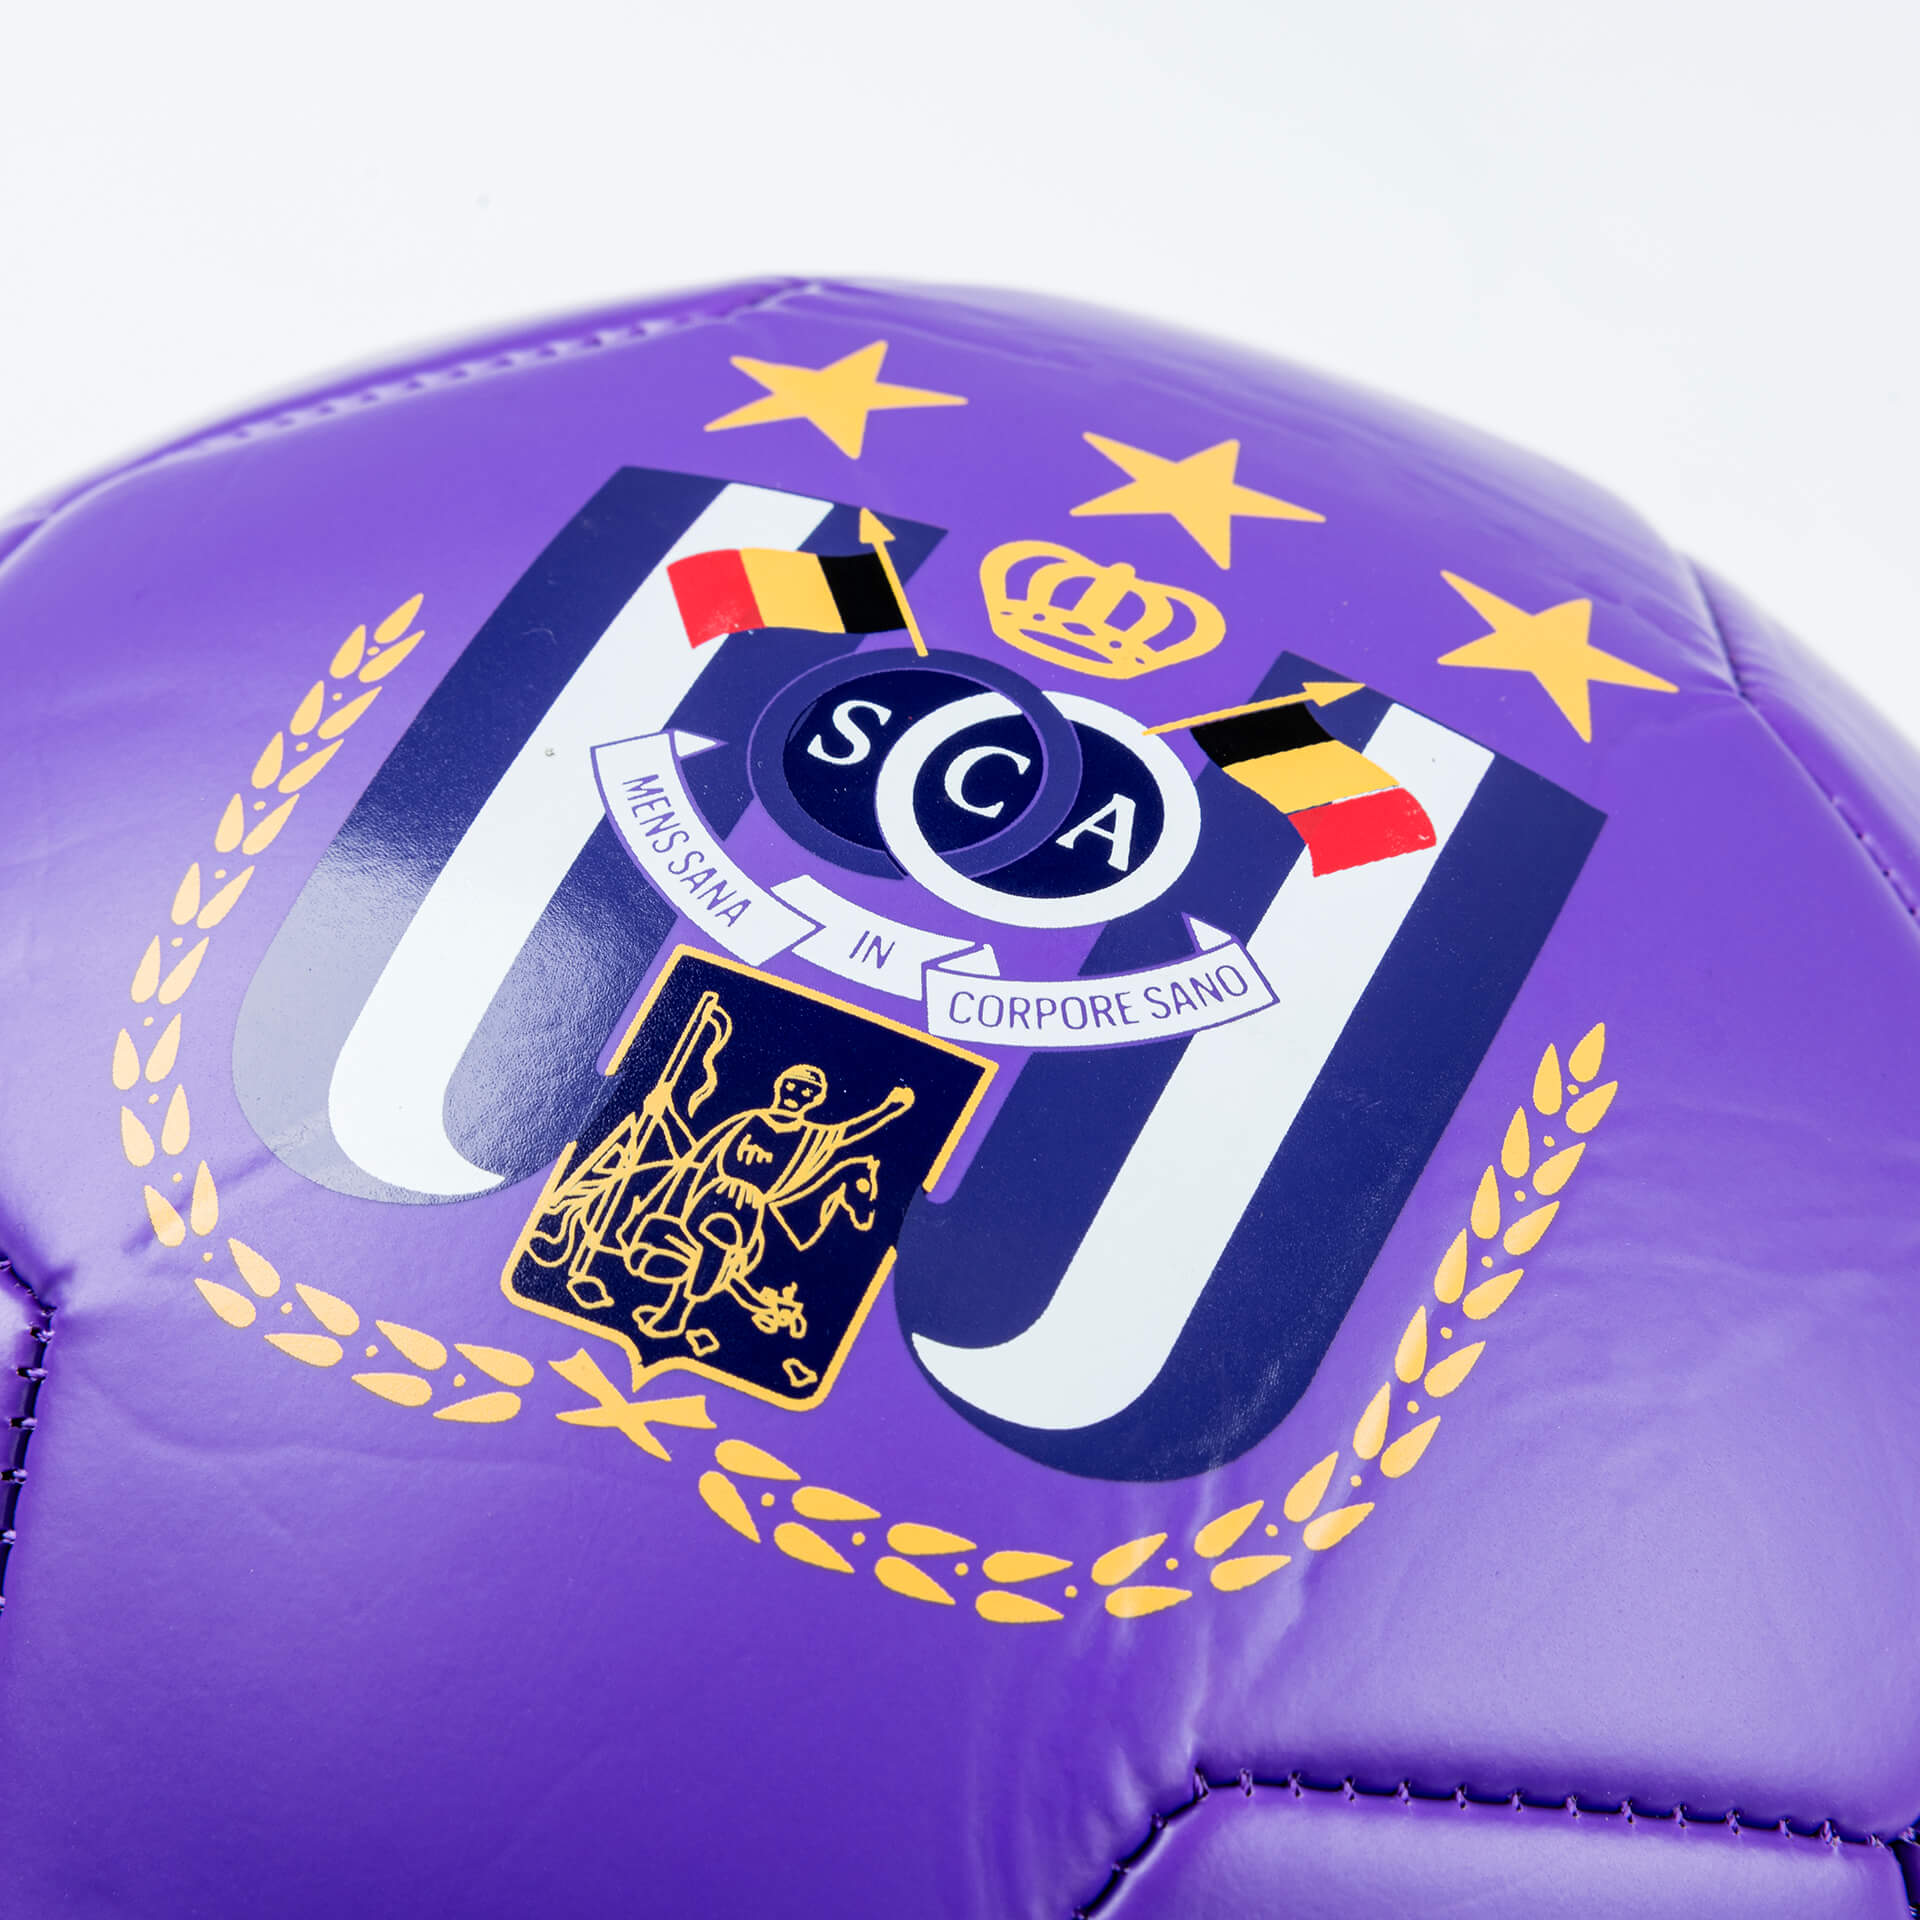 RSC Anderlecht paarse bal is-hover